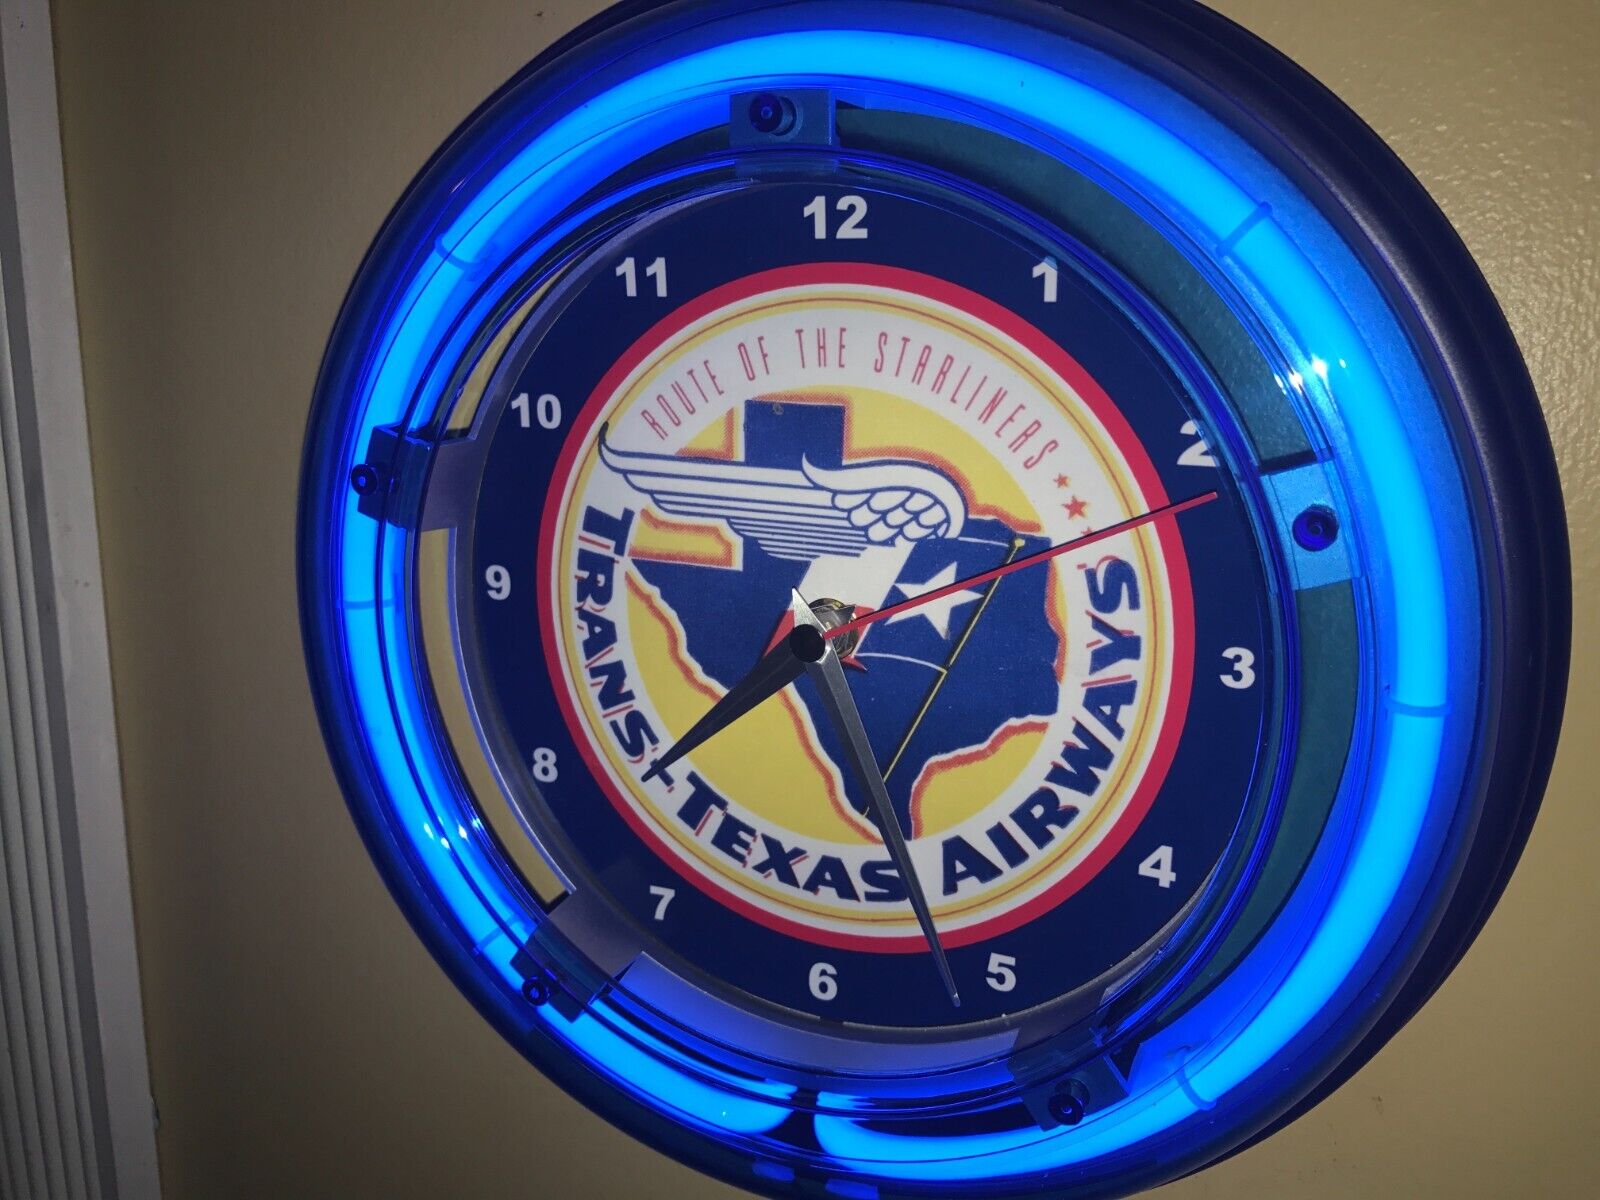 Trans Texas Airways Airline Airport Terminal Neon Wall Clock Advertising Sign